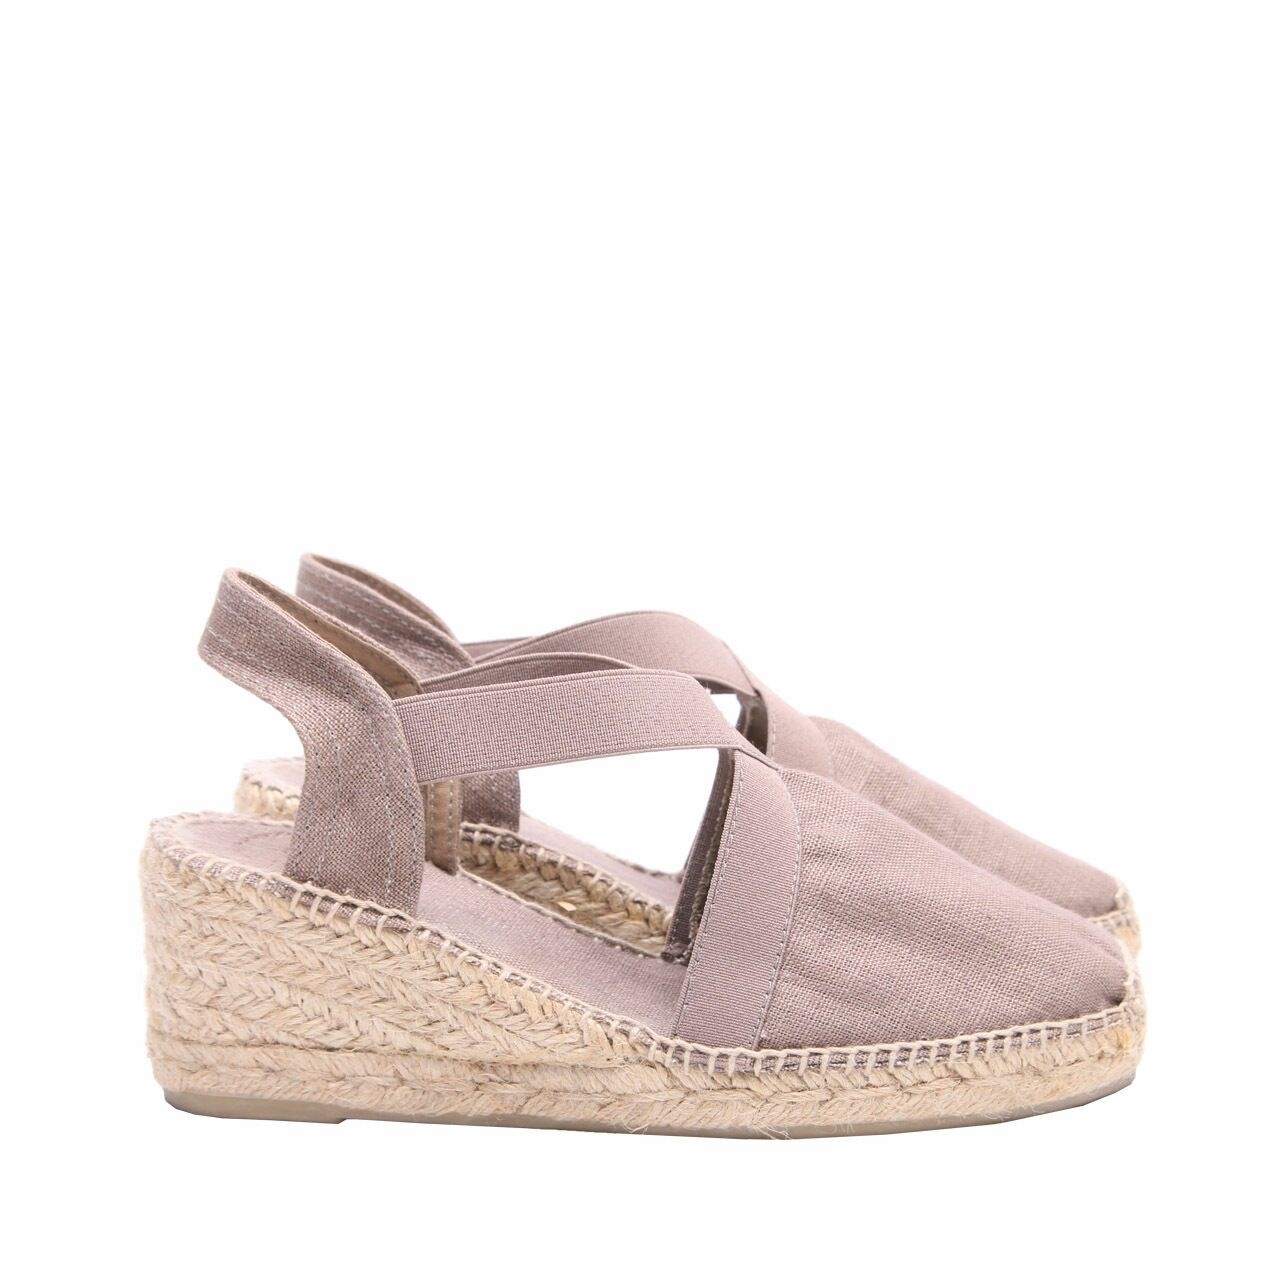 Toni Pons Taupe Wedges